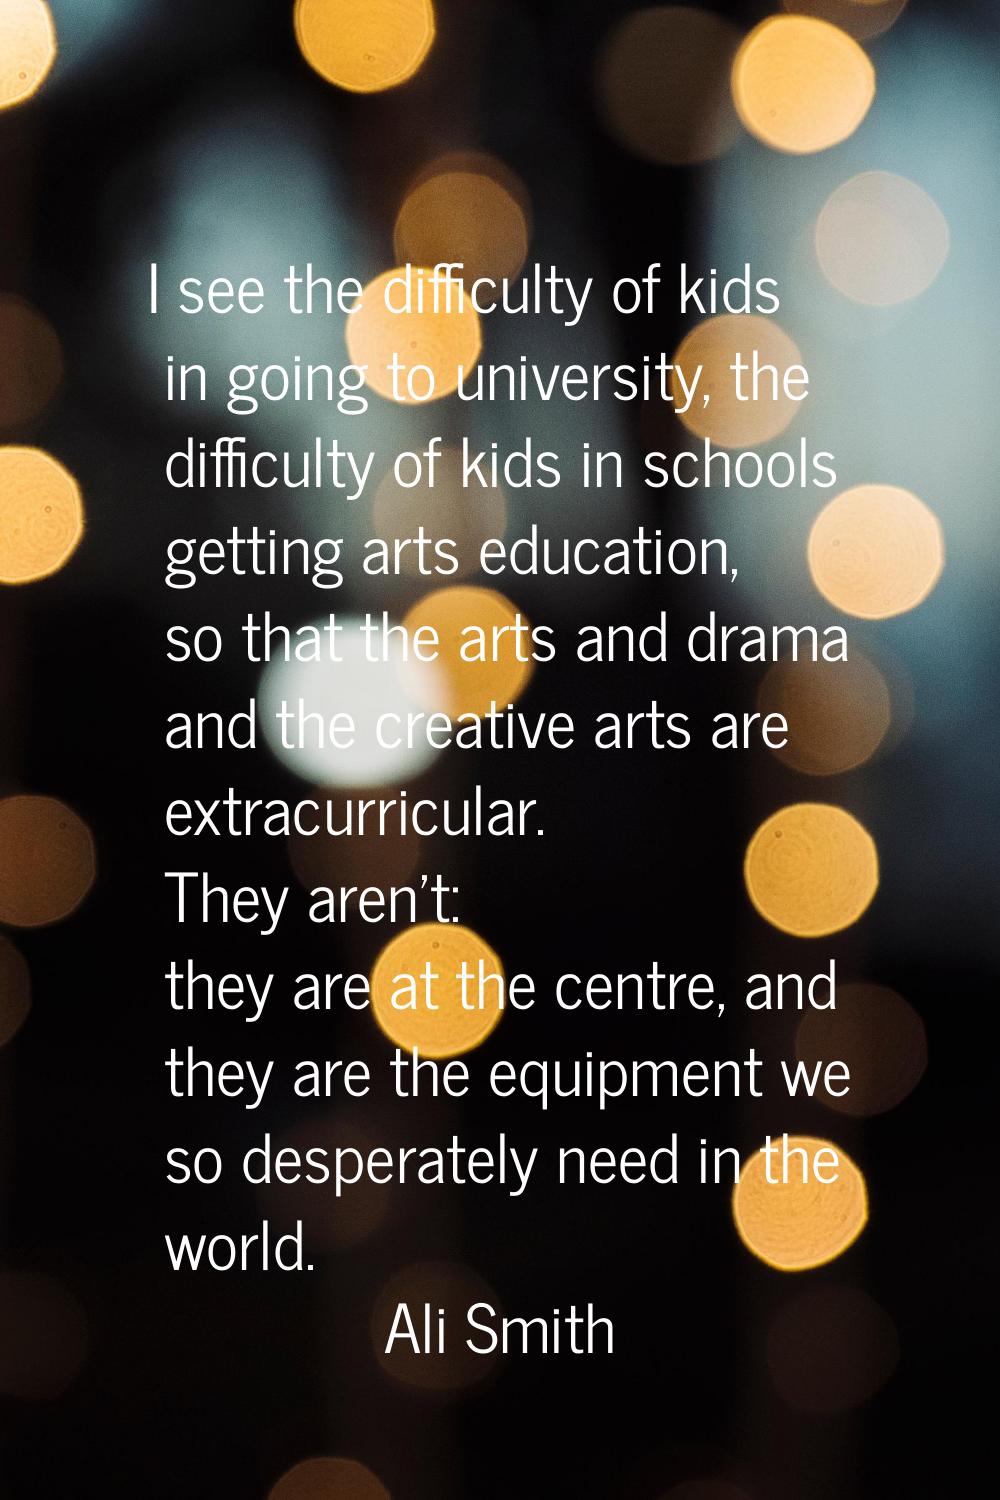 I see the difficulty of kids in going to university, the difficulty of kids in schools getting arts